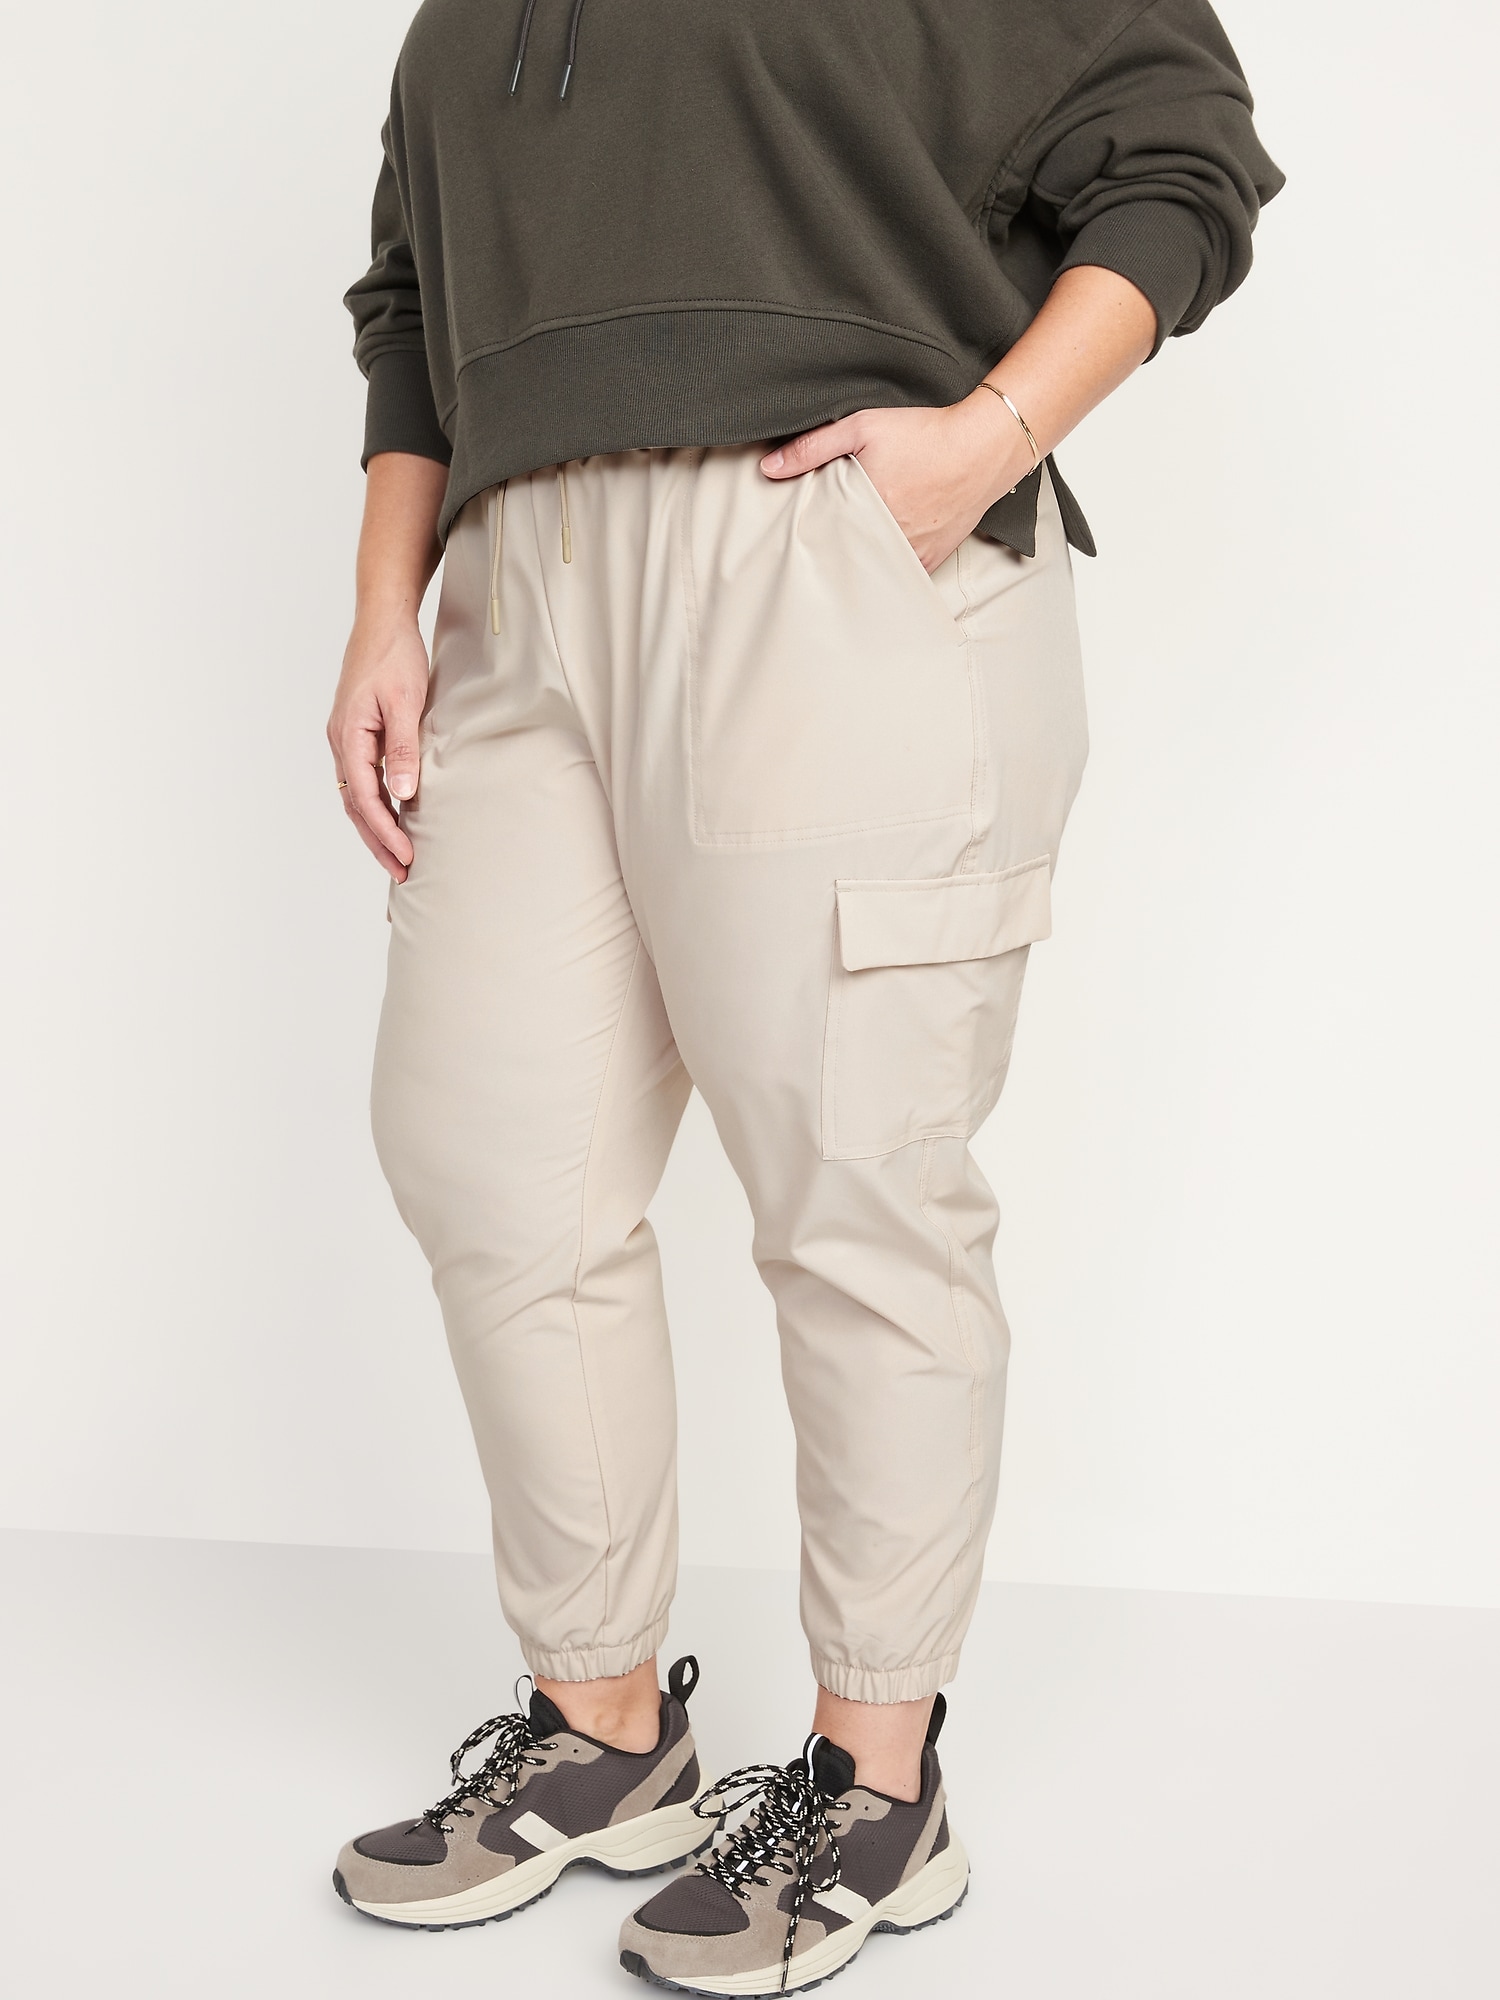 High-Waisted StretchTech Cargo Jogger Pants for Women | Old Navy